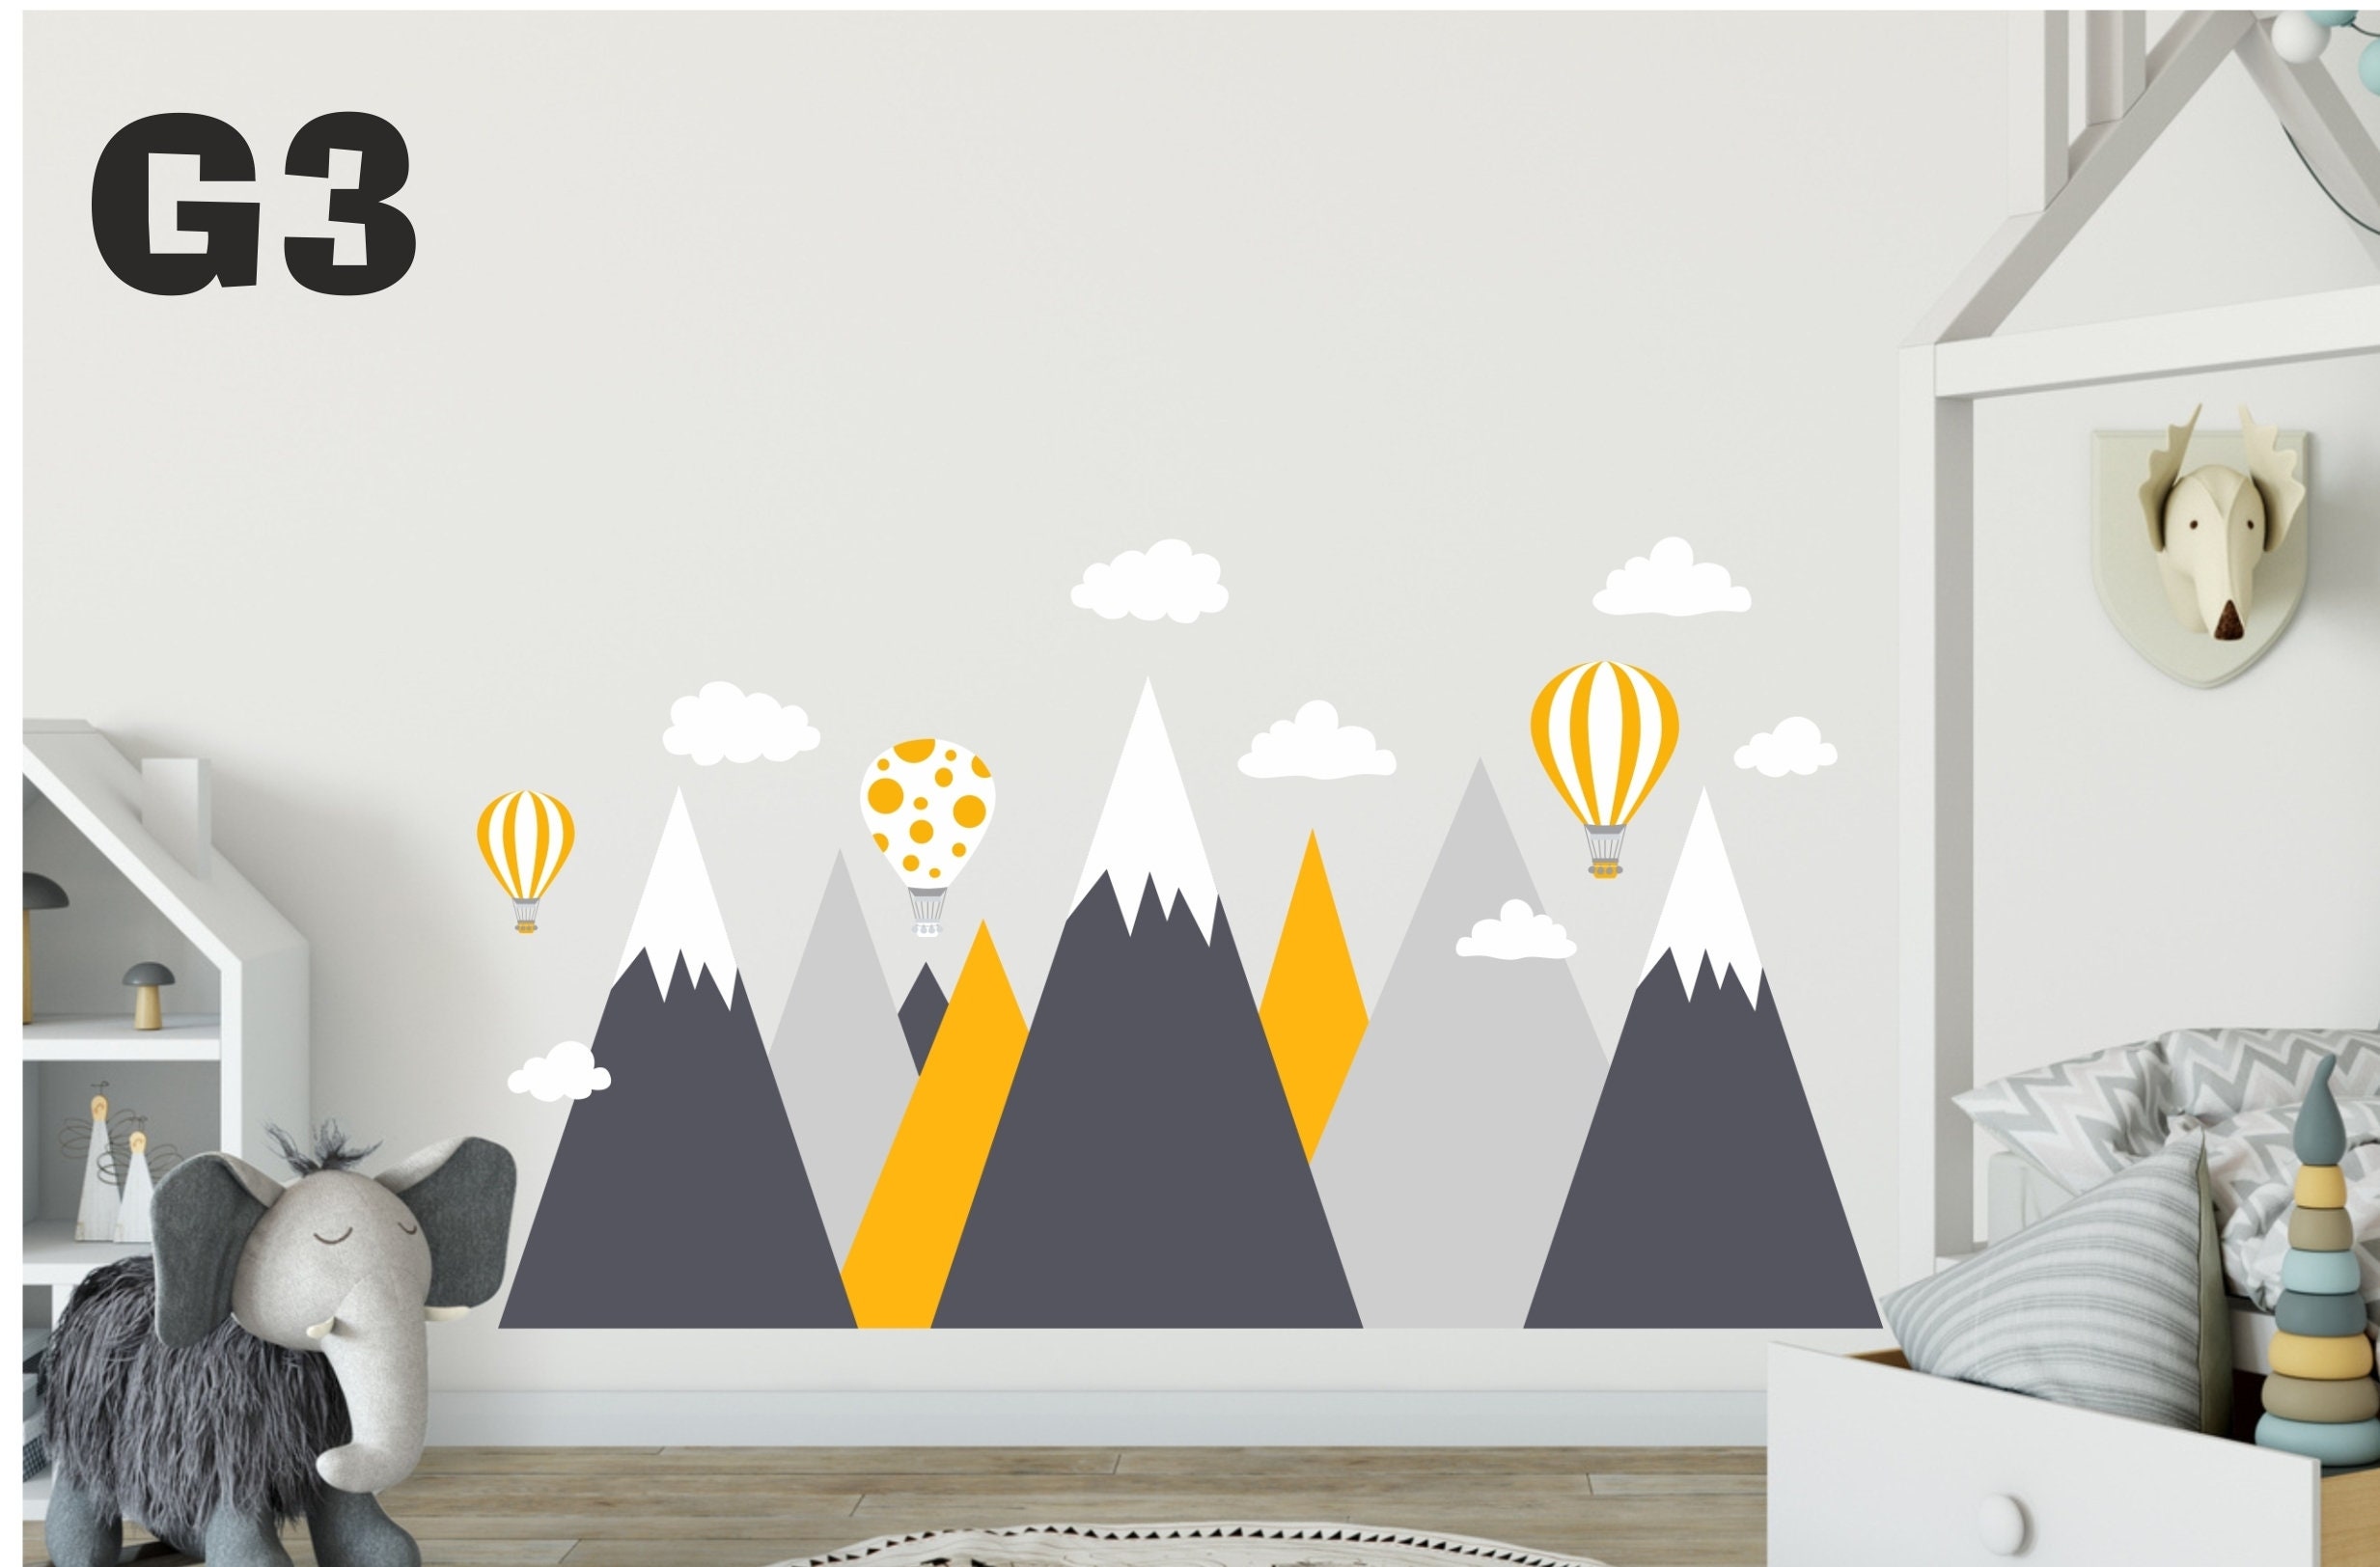 Details about   Wall Sticker Mountain Mountains Hot Air Balloons Children Baby Wall Decal Sticke 